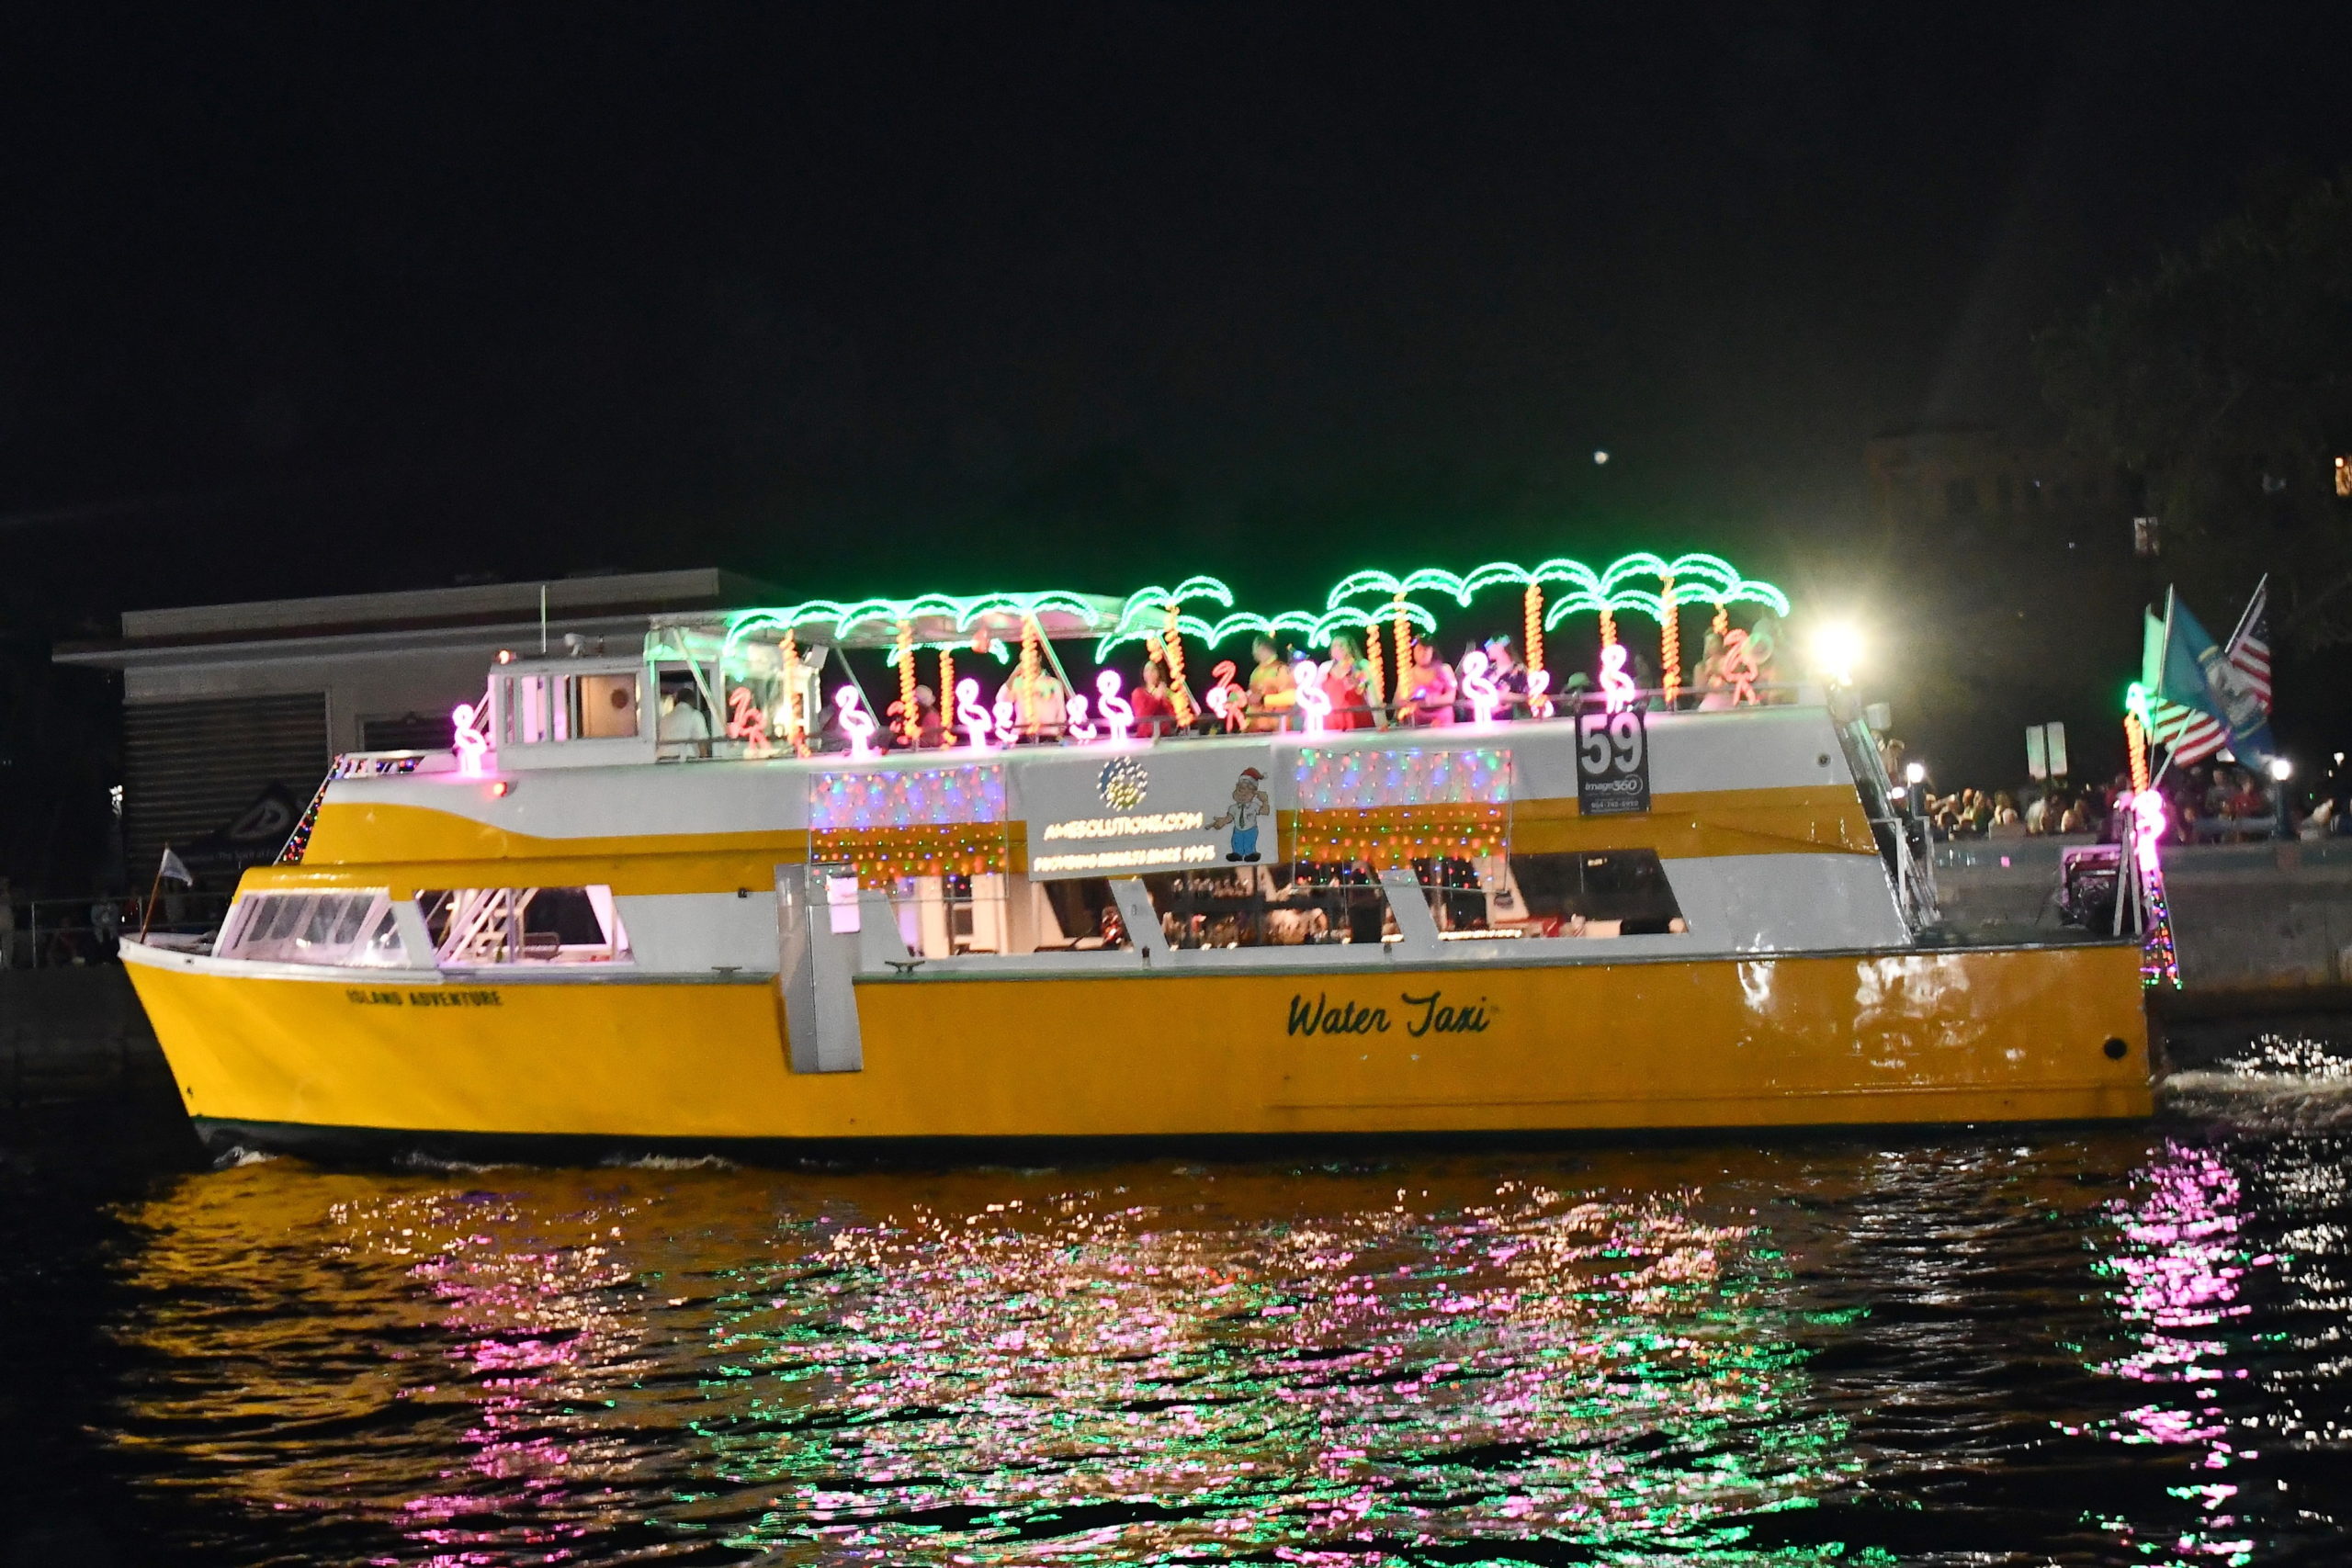 A-M-E Solutions Aboard Water Taxi Island Adventure, boat number 59 in the 2022 Winterfest Boat Parade